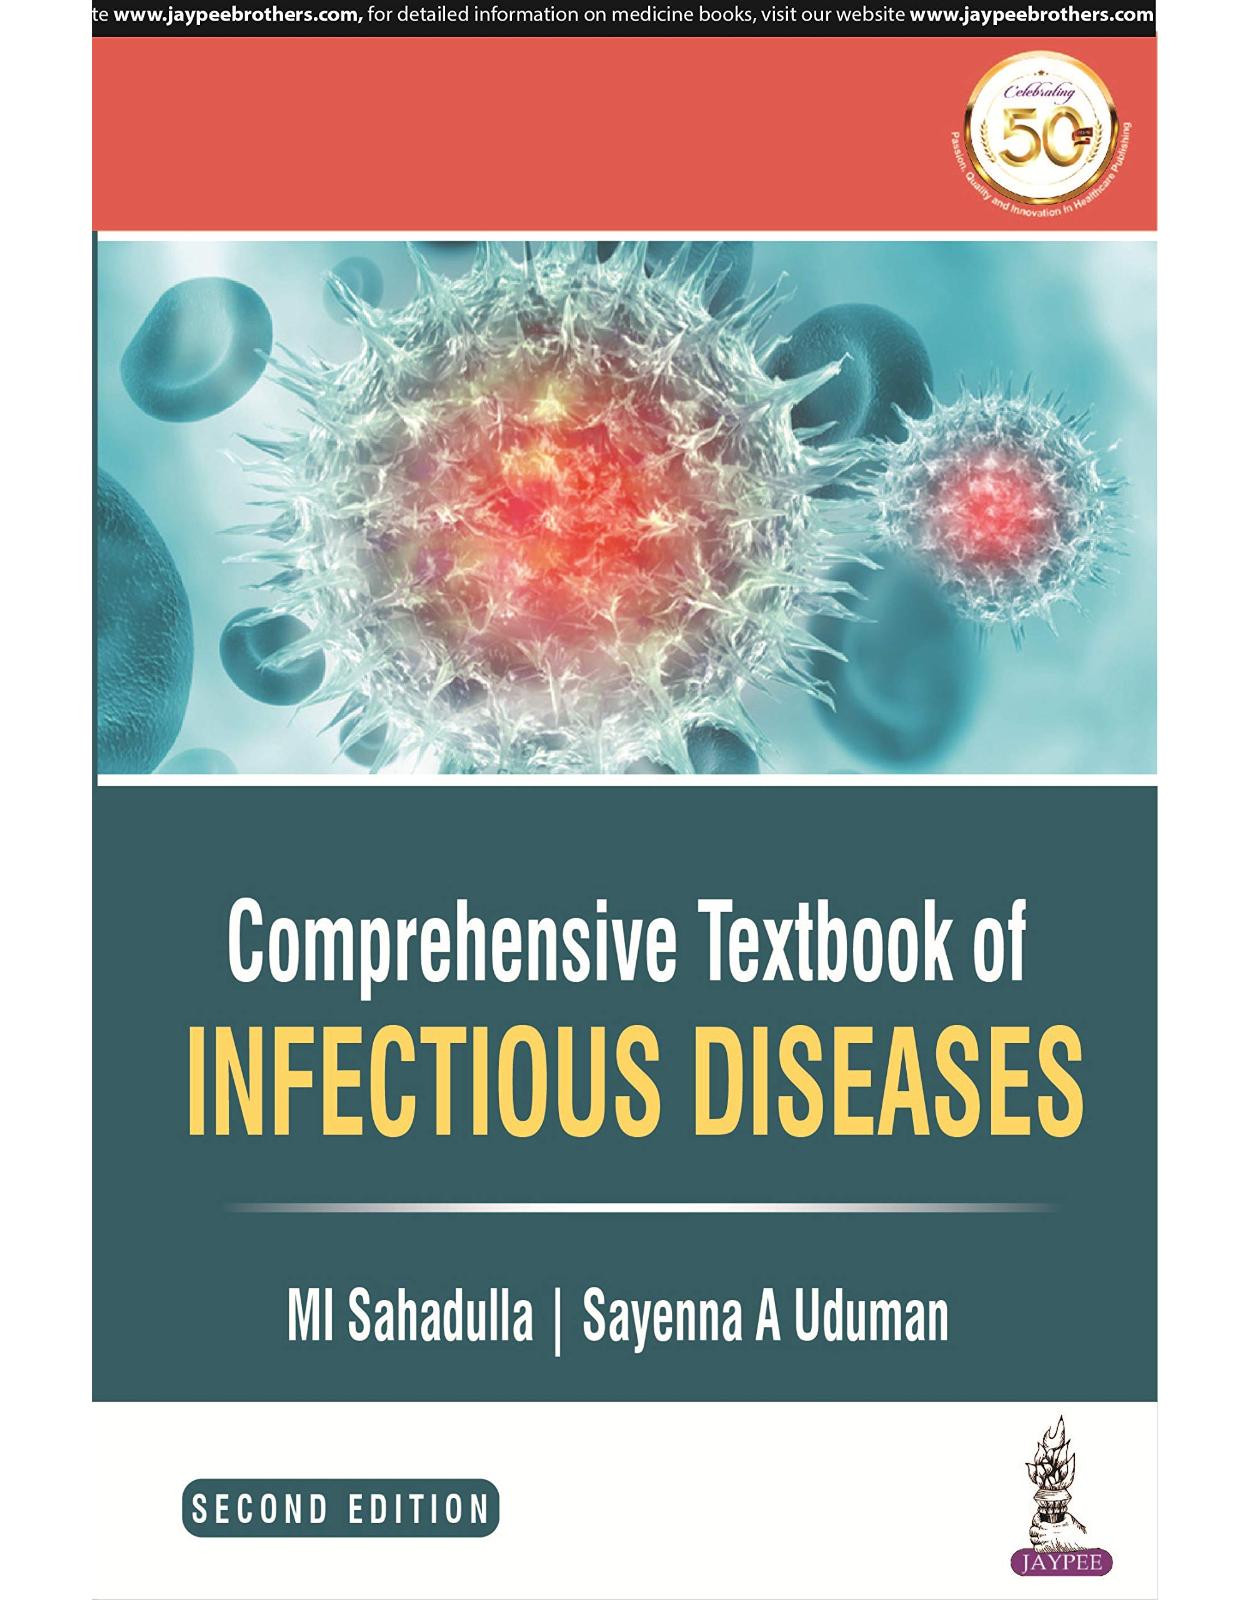 Comprehensive Textbook of Infectious Diseases